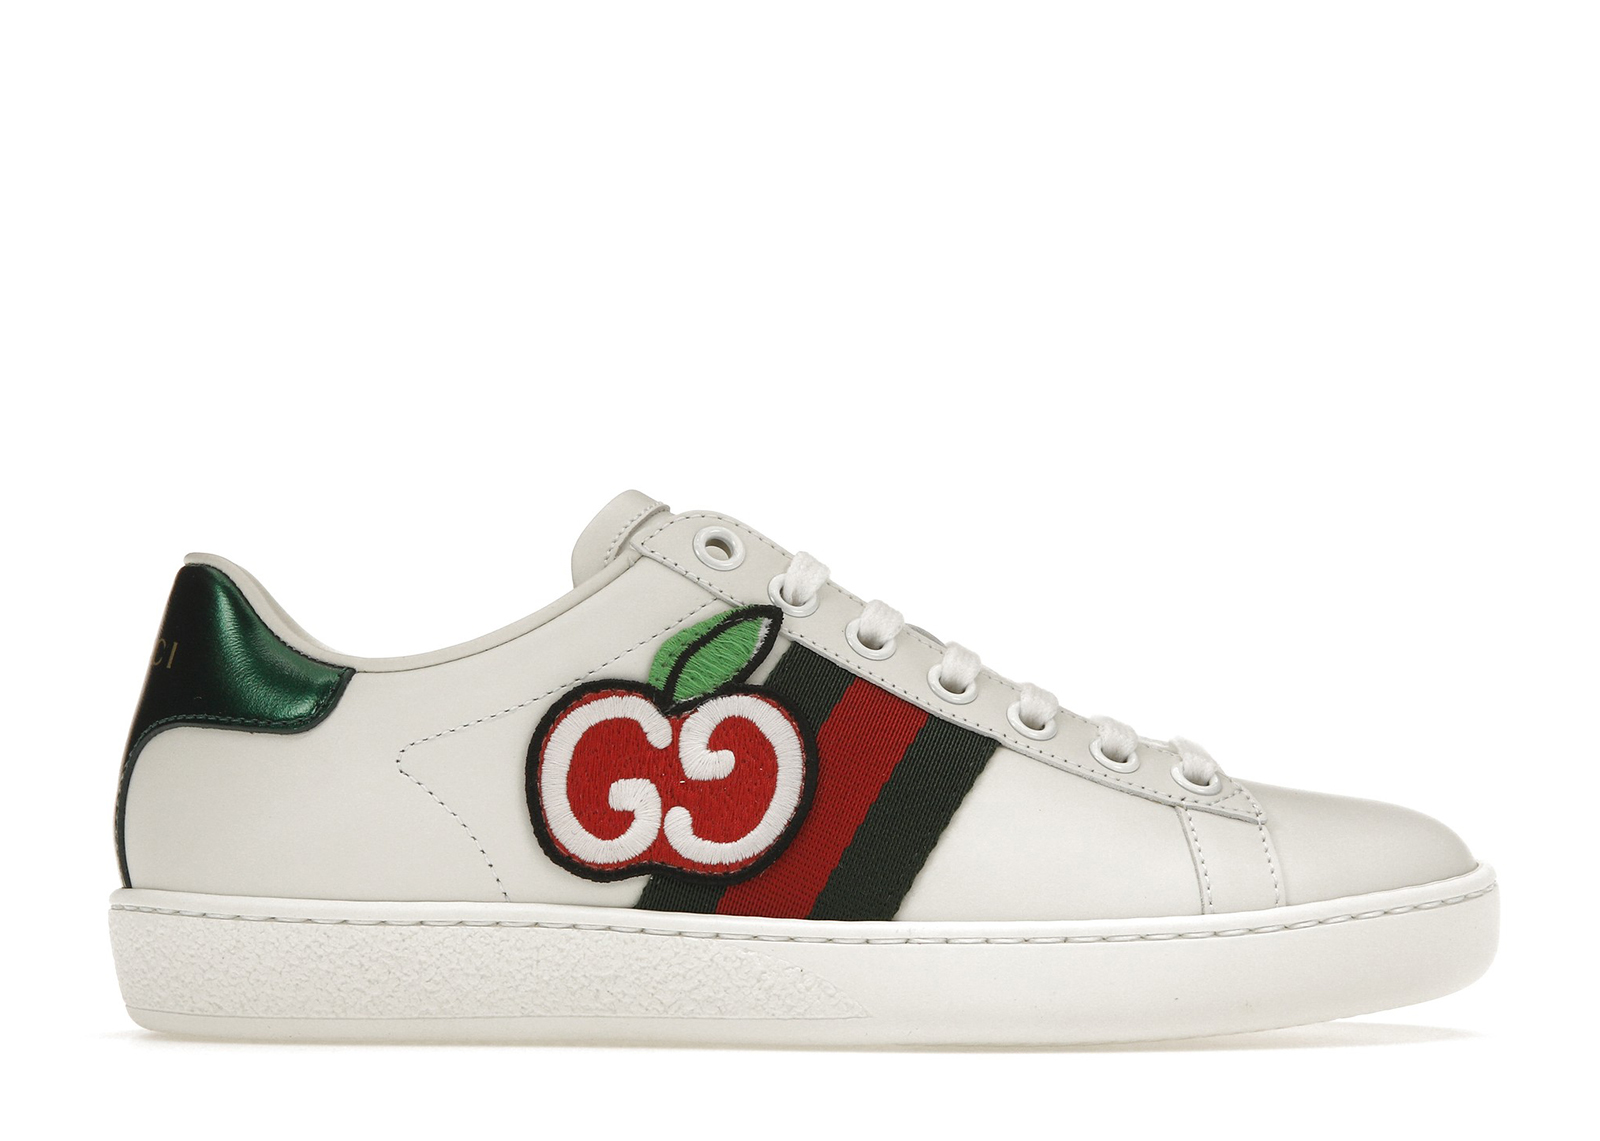 Gucci Ace GG Apple (Women's) - 611377 DOPE0 9064 - US